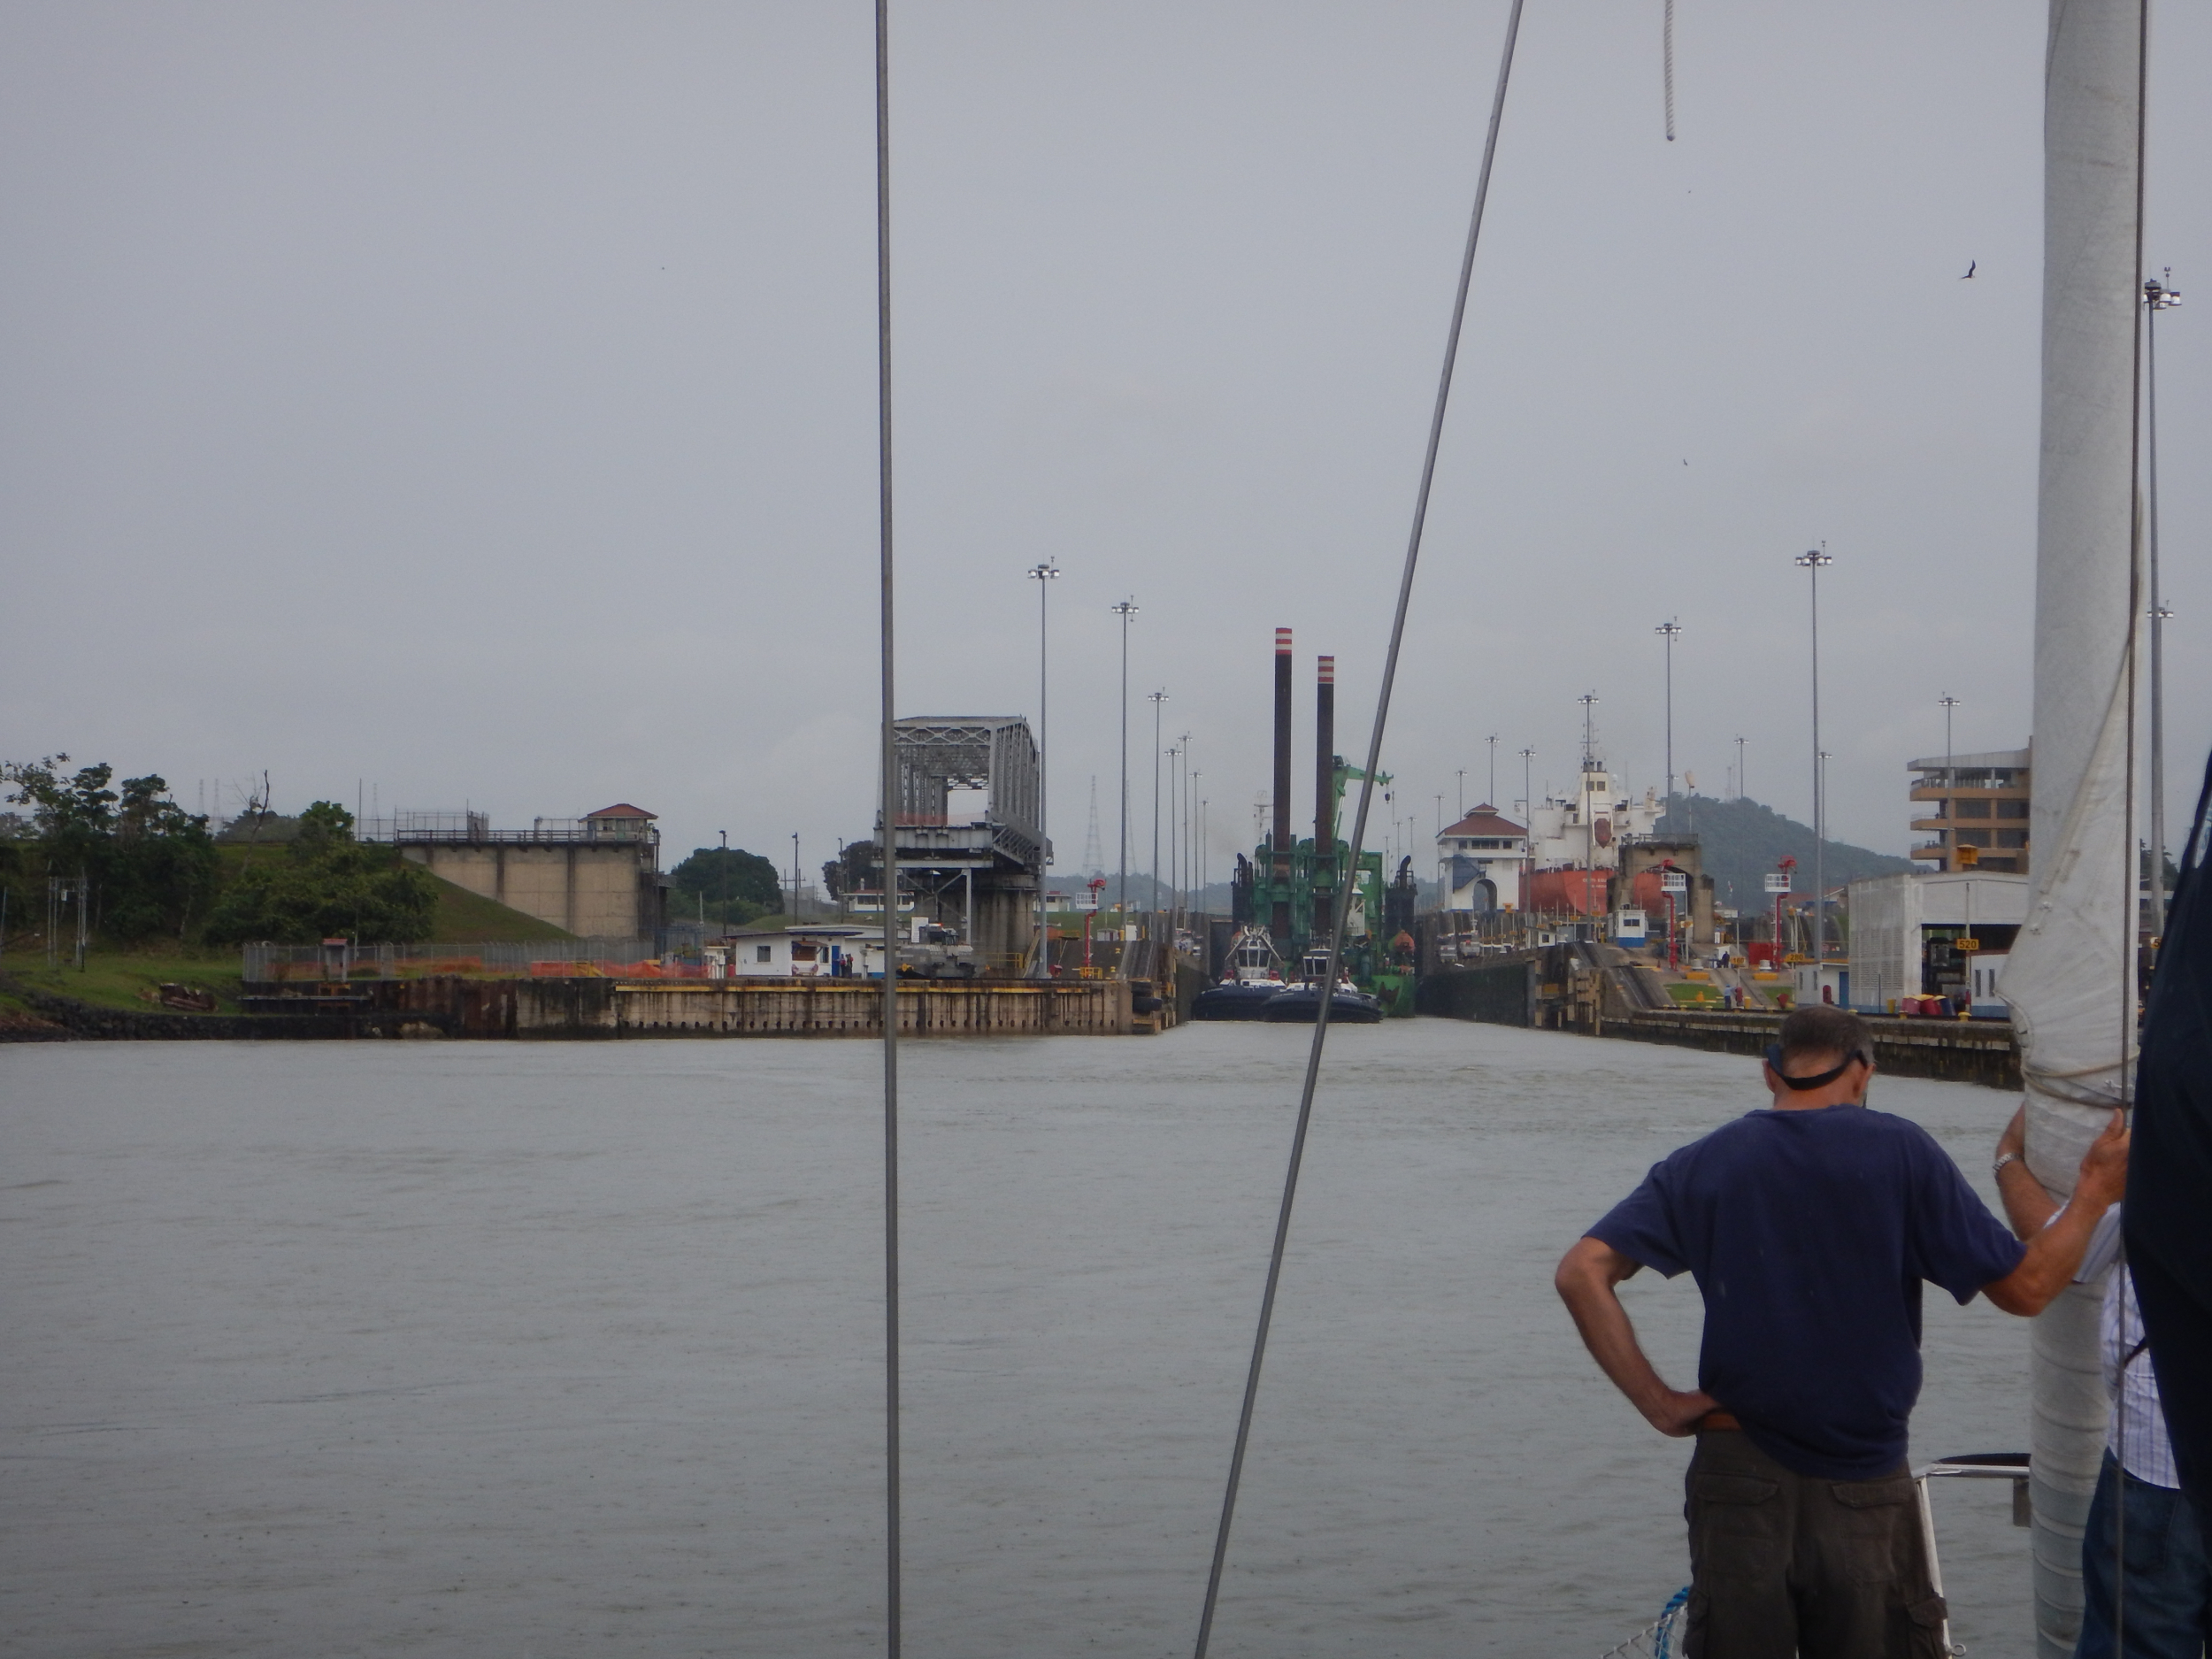 3. Approaching the first lock, Panama Canal